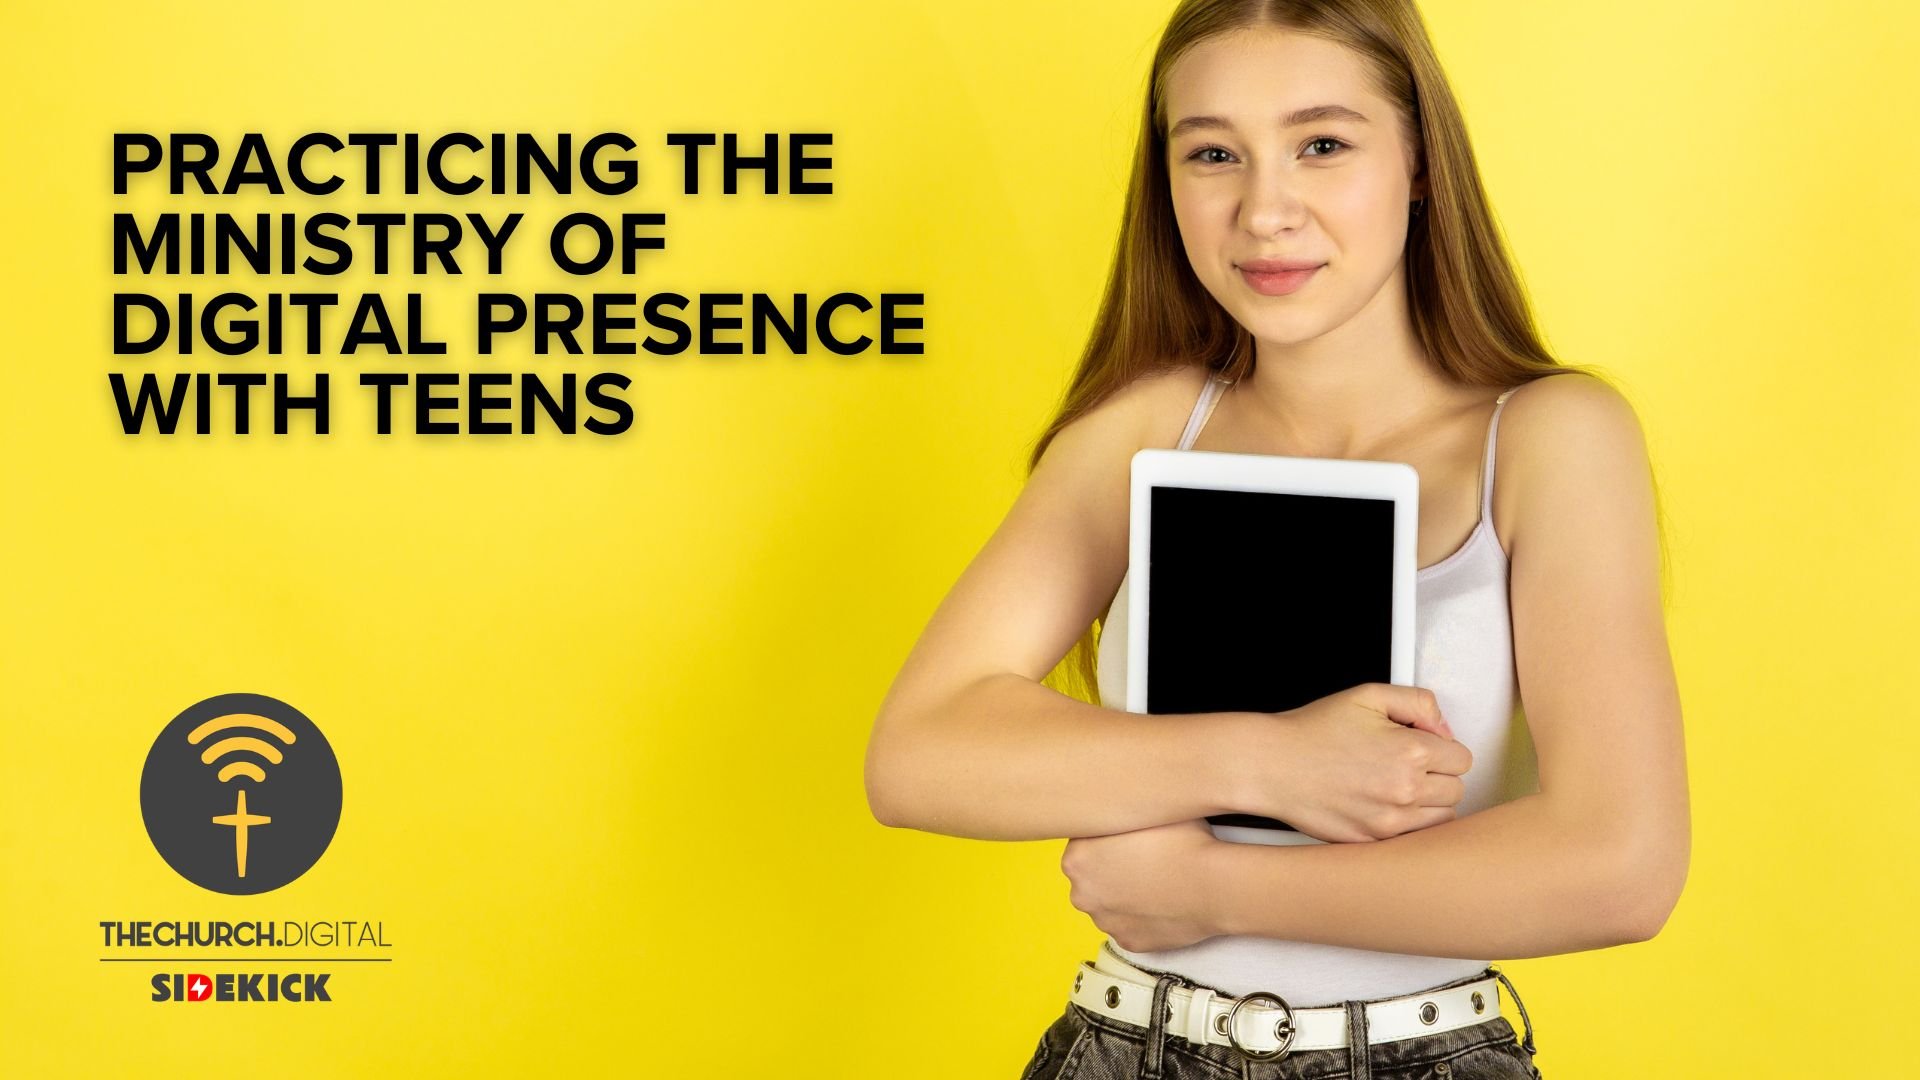 Practicing the Ministry of Digital Presence with Teens